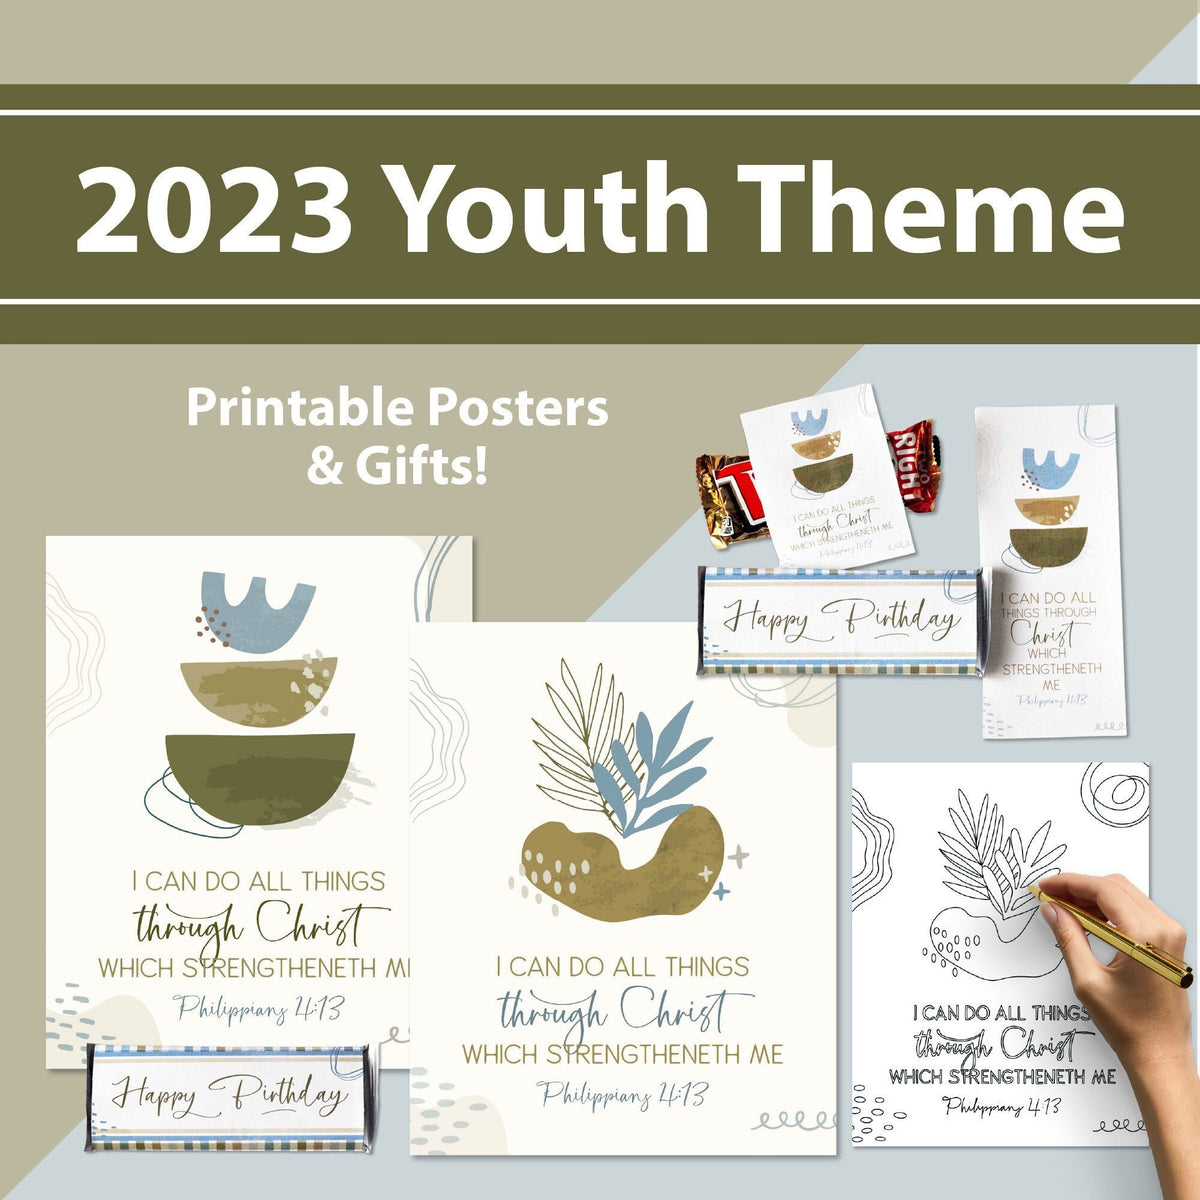 2023-youth-theme-2023-lds-youth-theme-posters-ministering-printables